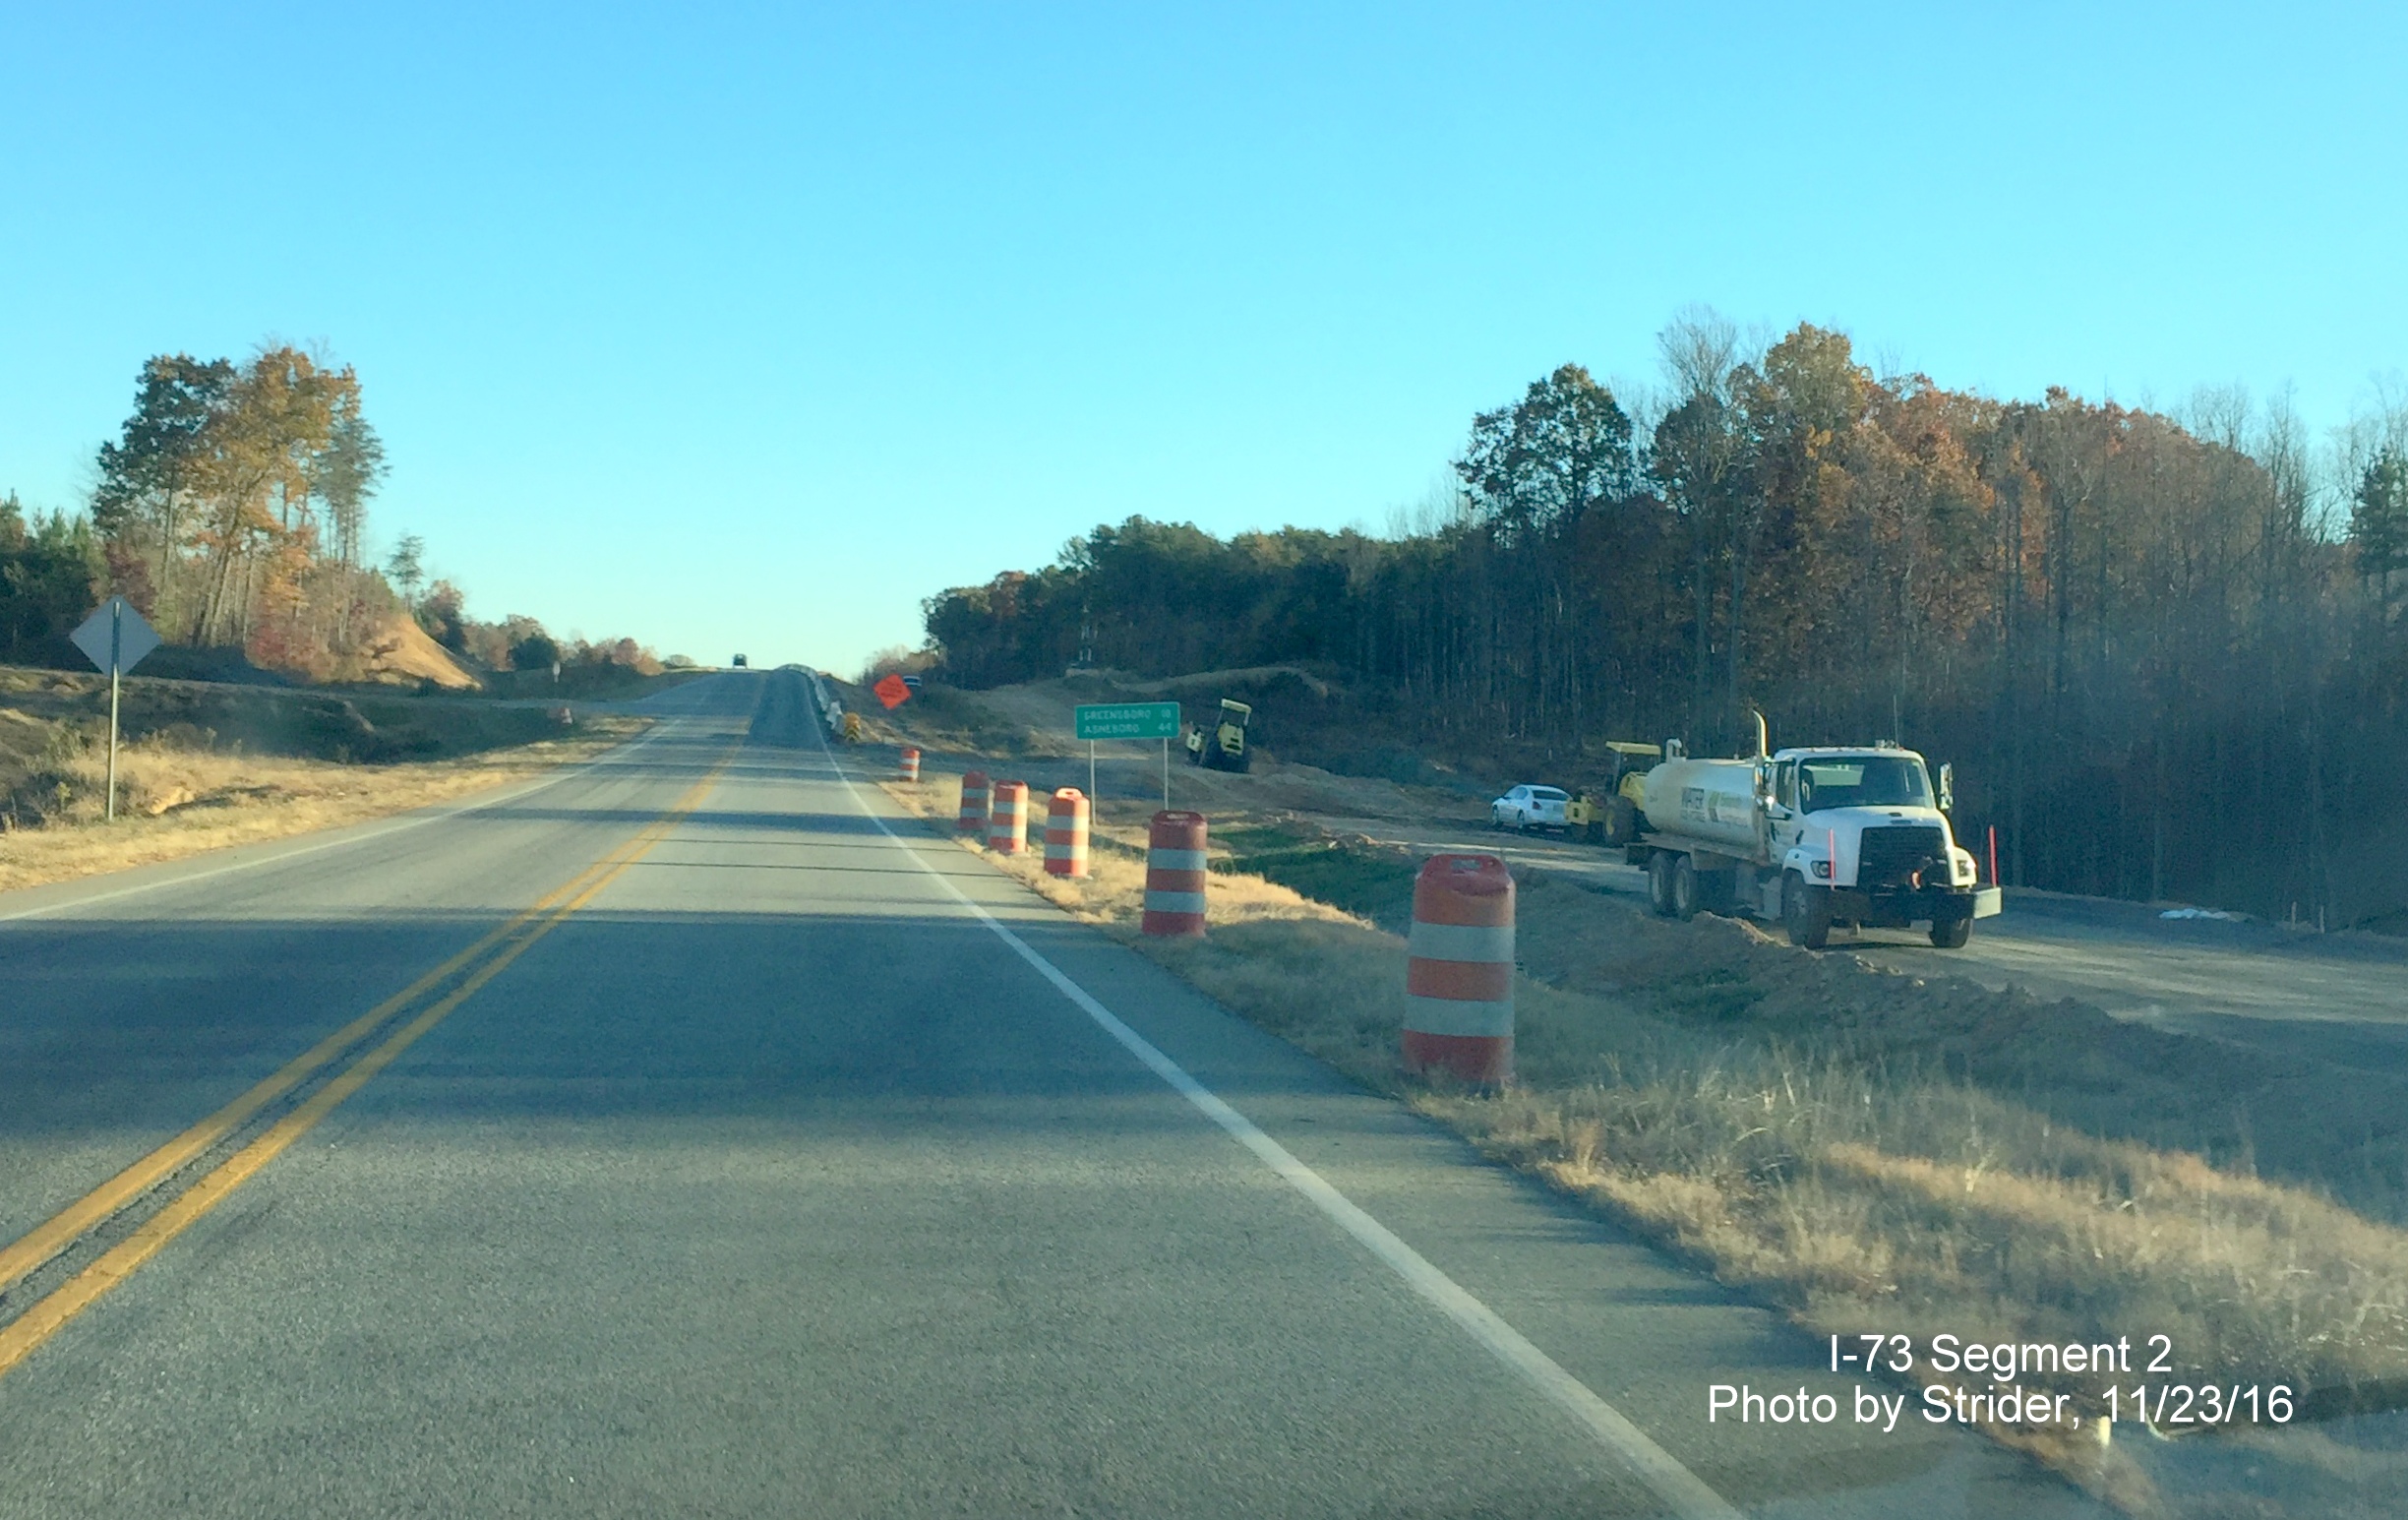 Image looking south on US 220 showing progress in constructing future I-73 Southbound lanes after NC 68 intersection, by Strider